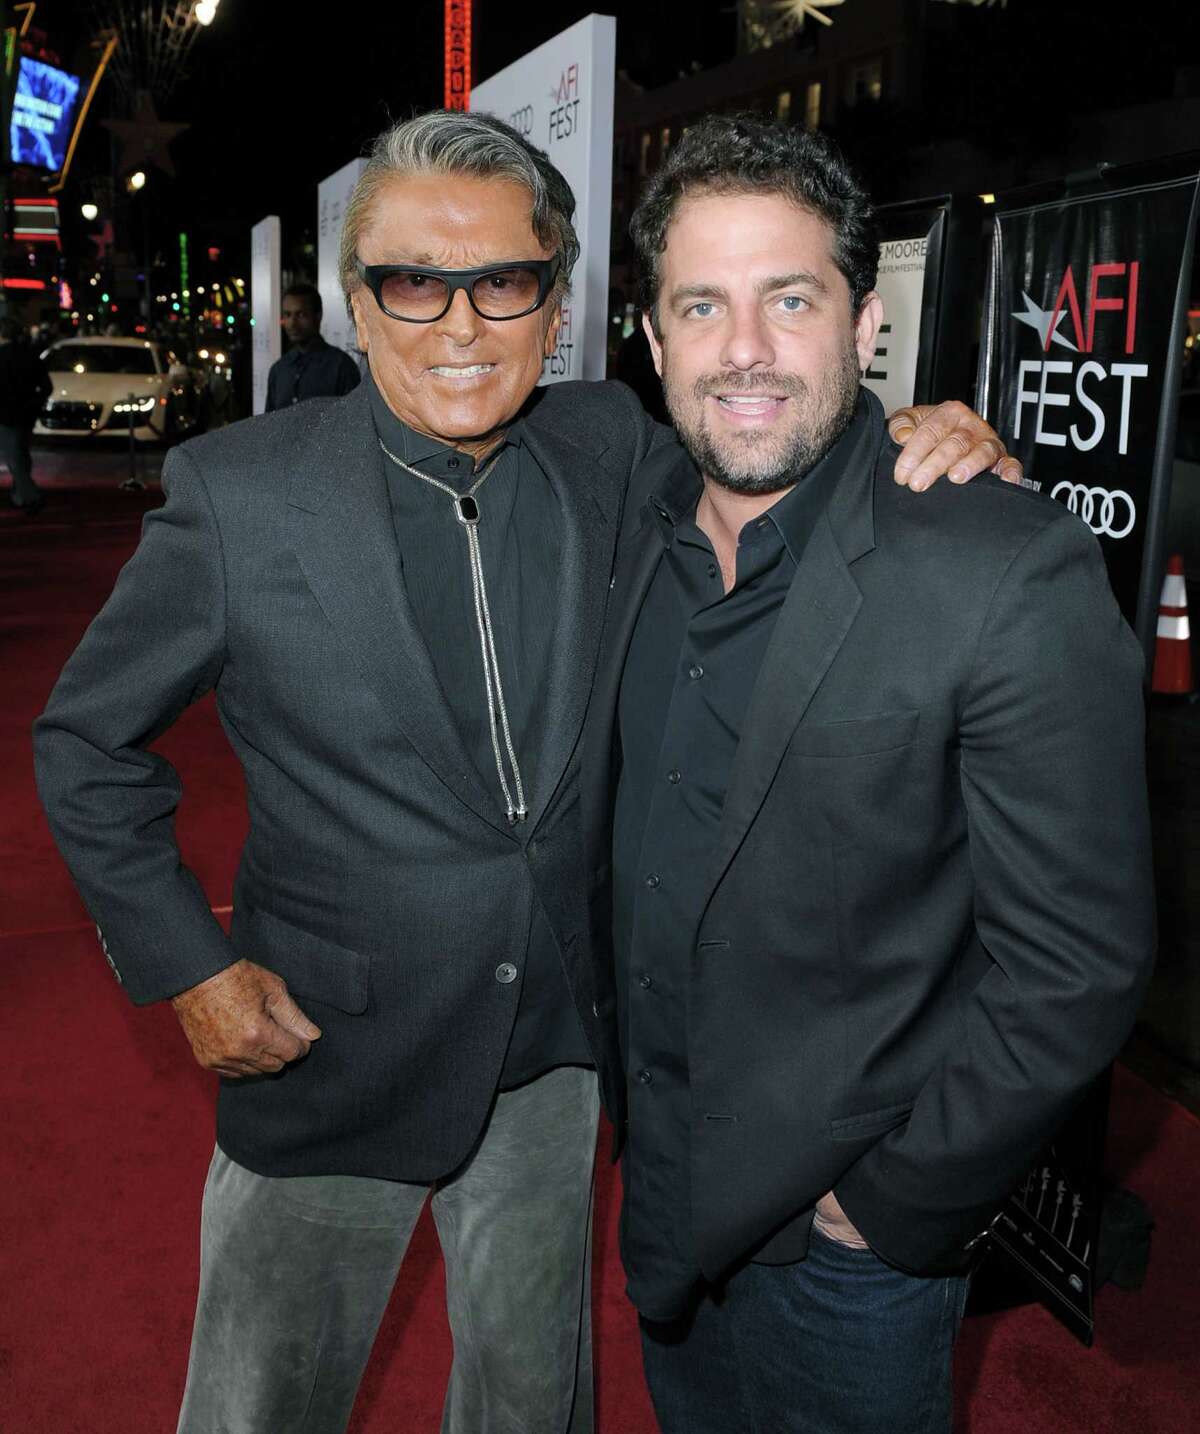 LOS ANGELES, CA - NOVEMBER 05: Producer Robert Evans (L) and director Brett Ratner arrive at the AFI FEST 2009 screening of the Weinstein Company's "A Single Man" at the Chinese Theater on November 5, 2009 in Los Angeles, California. (Photo by Kevin Winter/Getty Images for AFI)